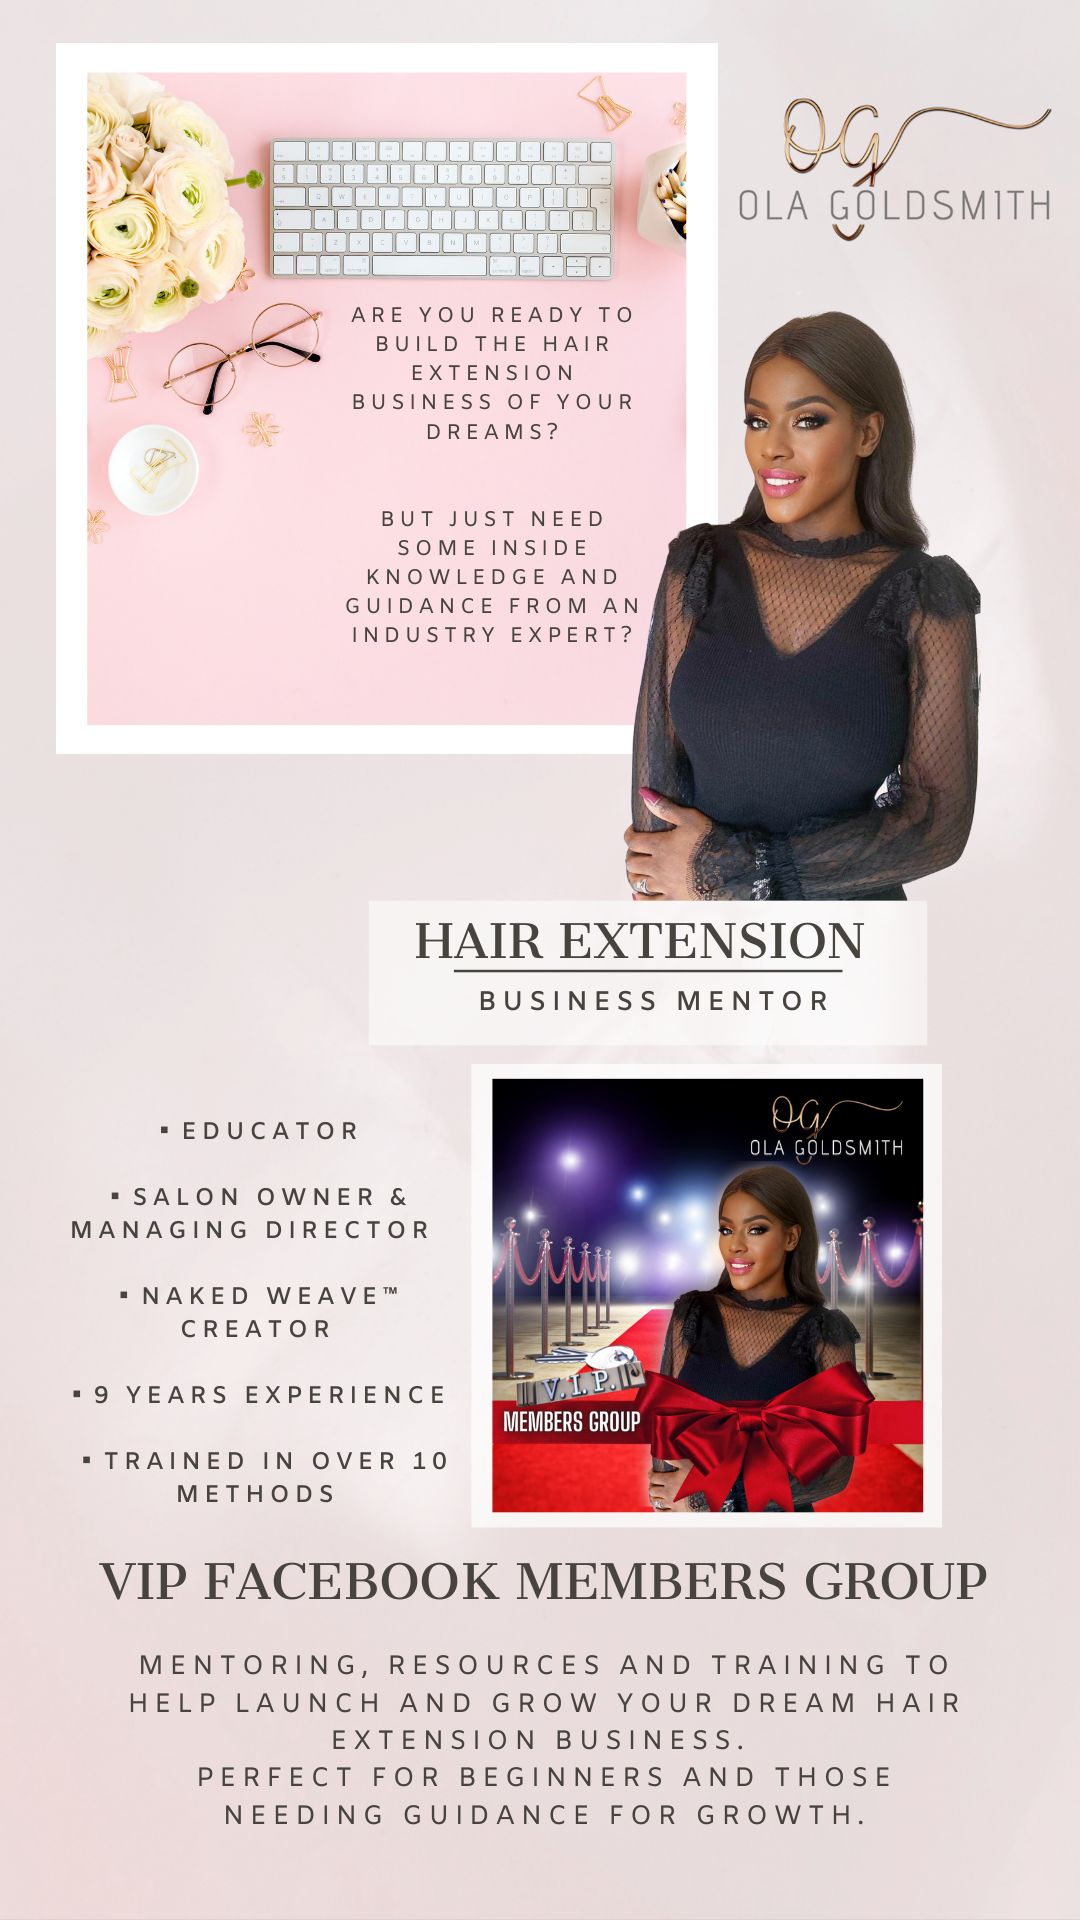 Ola Goldsmith - The Hair Extension Business Mentor